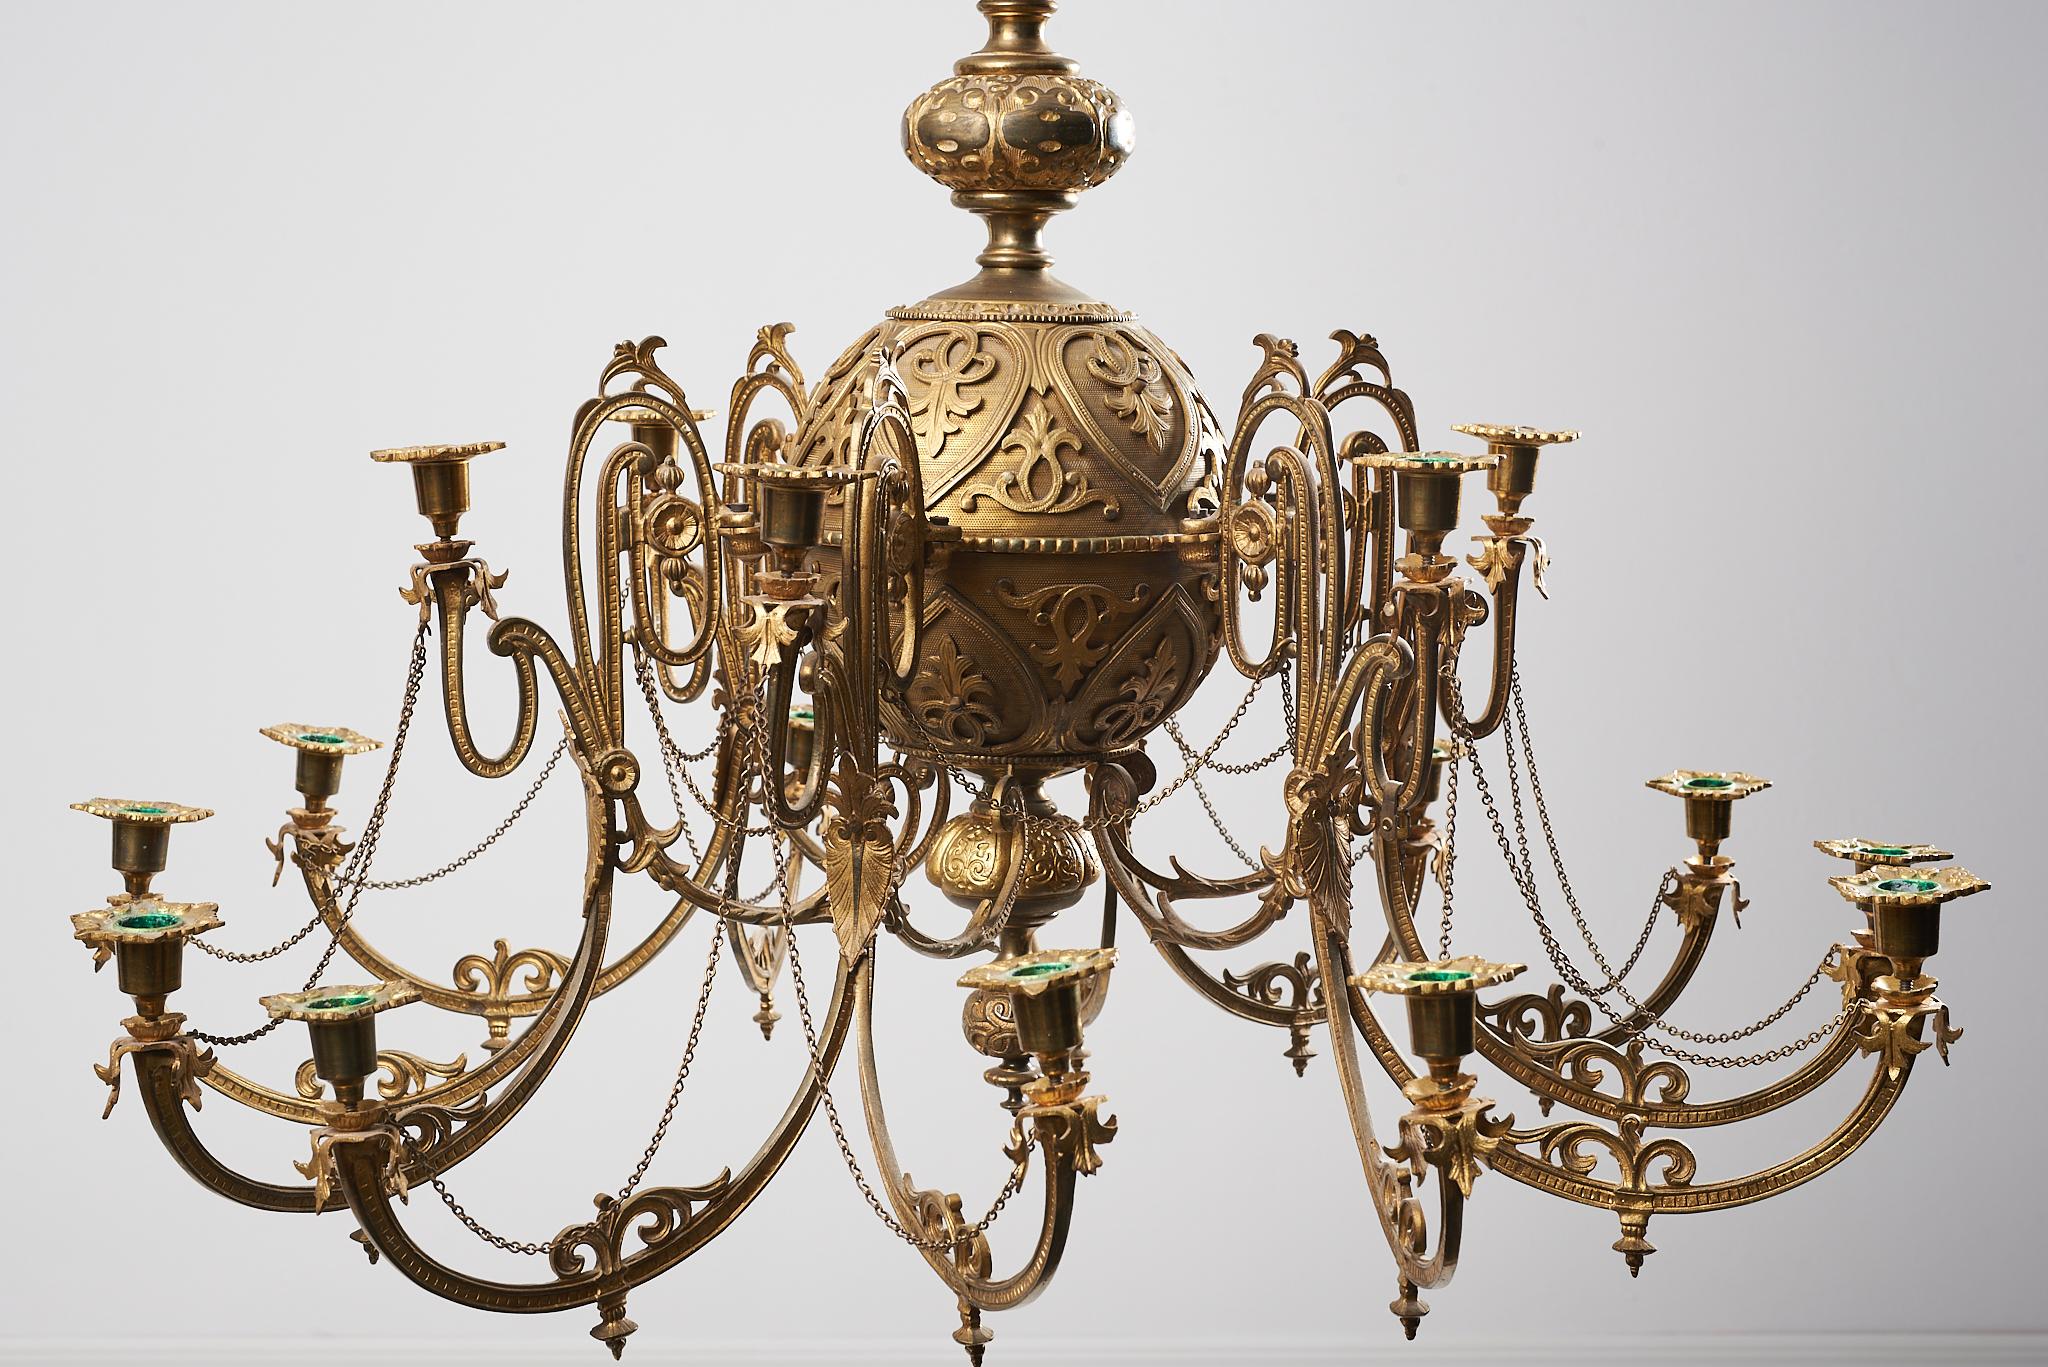 Antique Swedish Intricate Bronzed Chandelier In Good Condition For Sale In Kramfors, SE